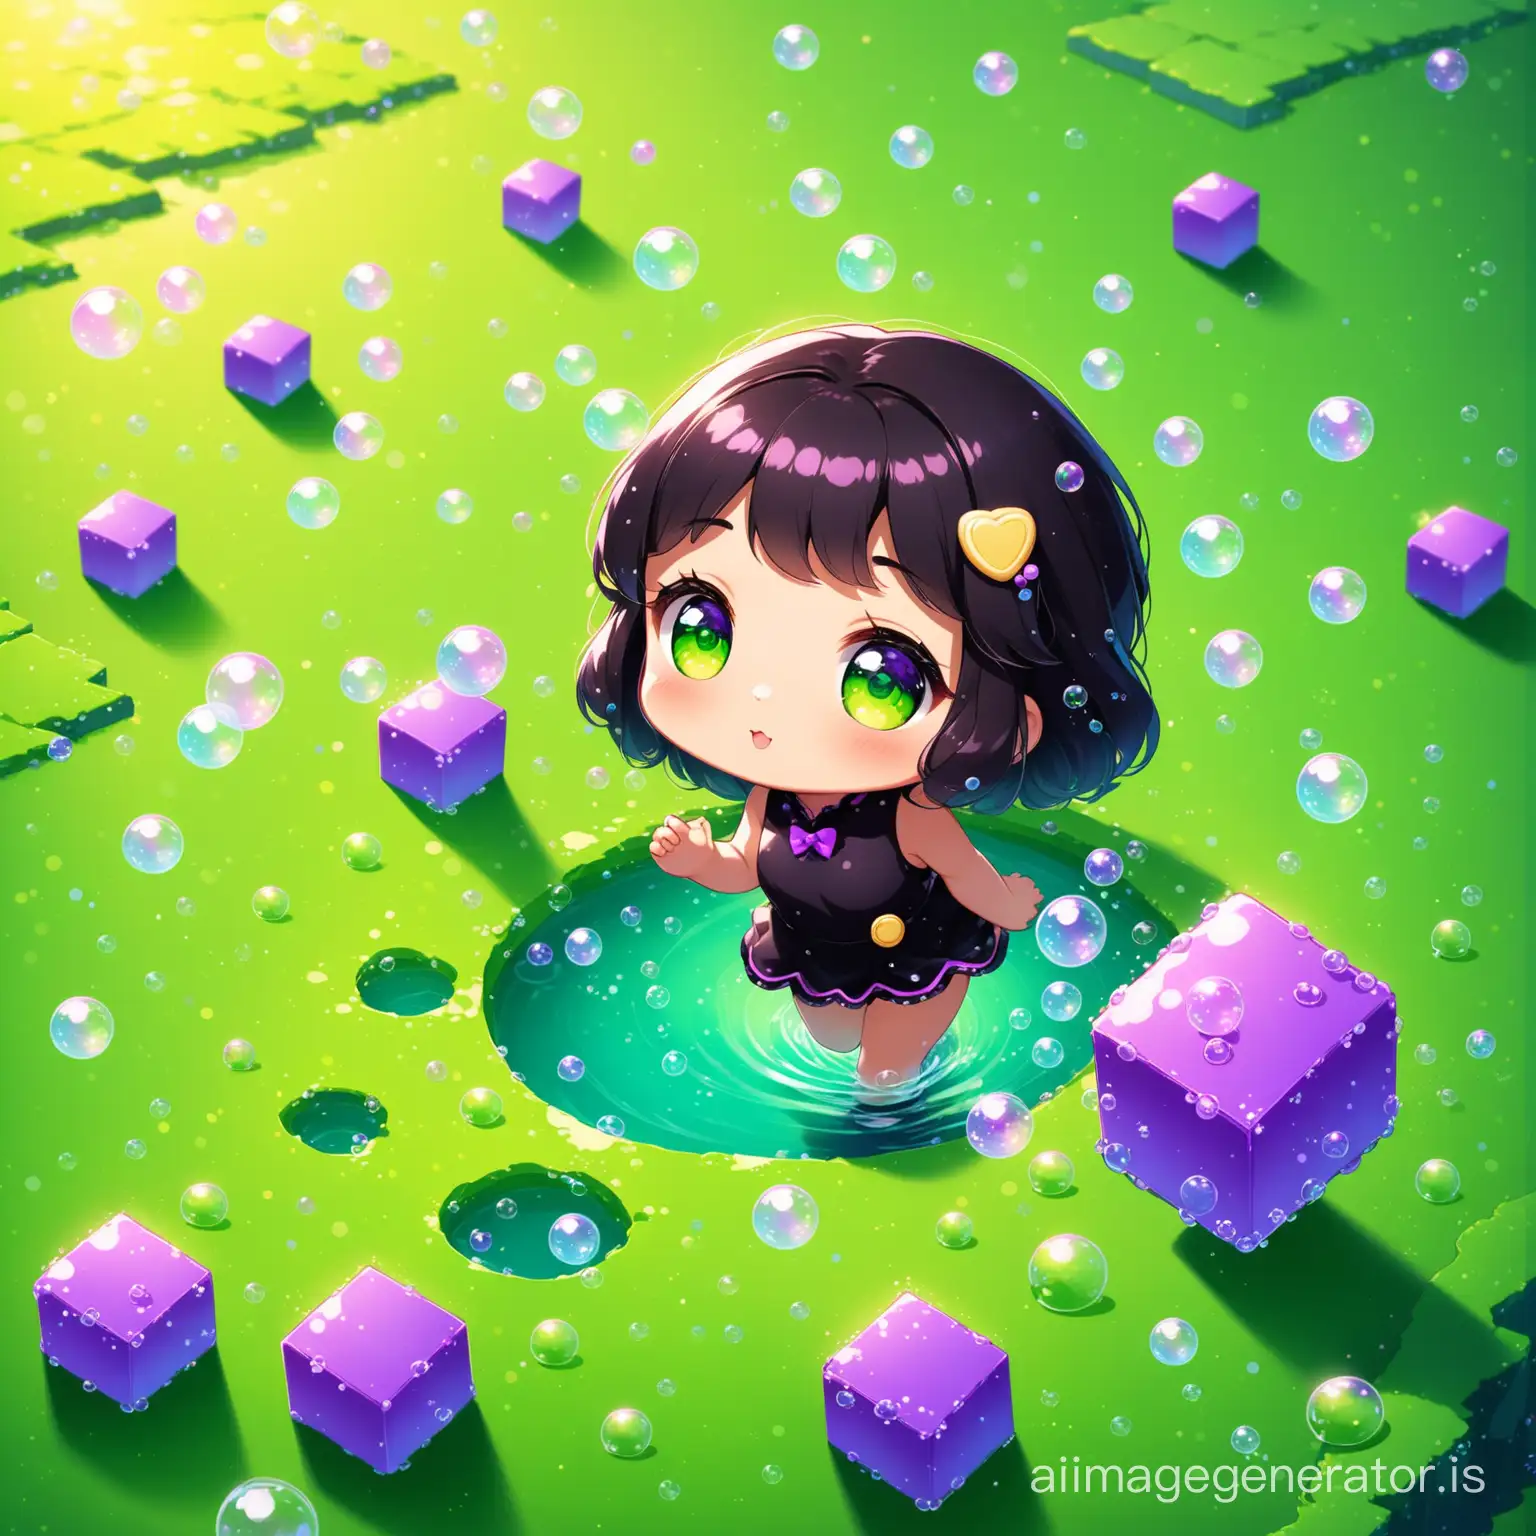 a small black cute cookie with green eyes walking in the land of Bubbles
Bubbles are scattered in the environment
also little purple blocks fell on the floor
Details are evident beautifully and with great precision
